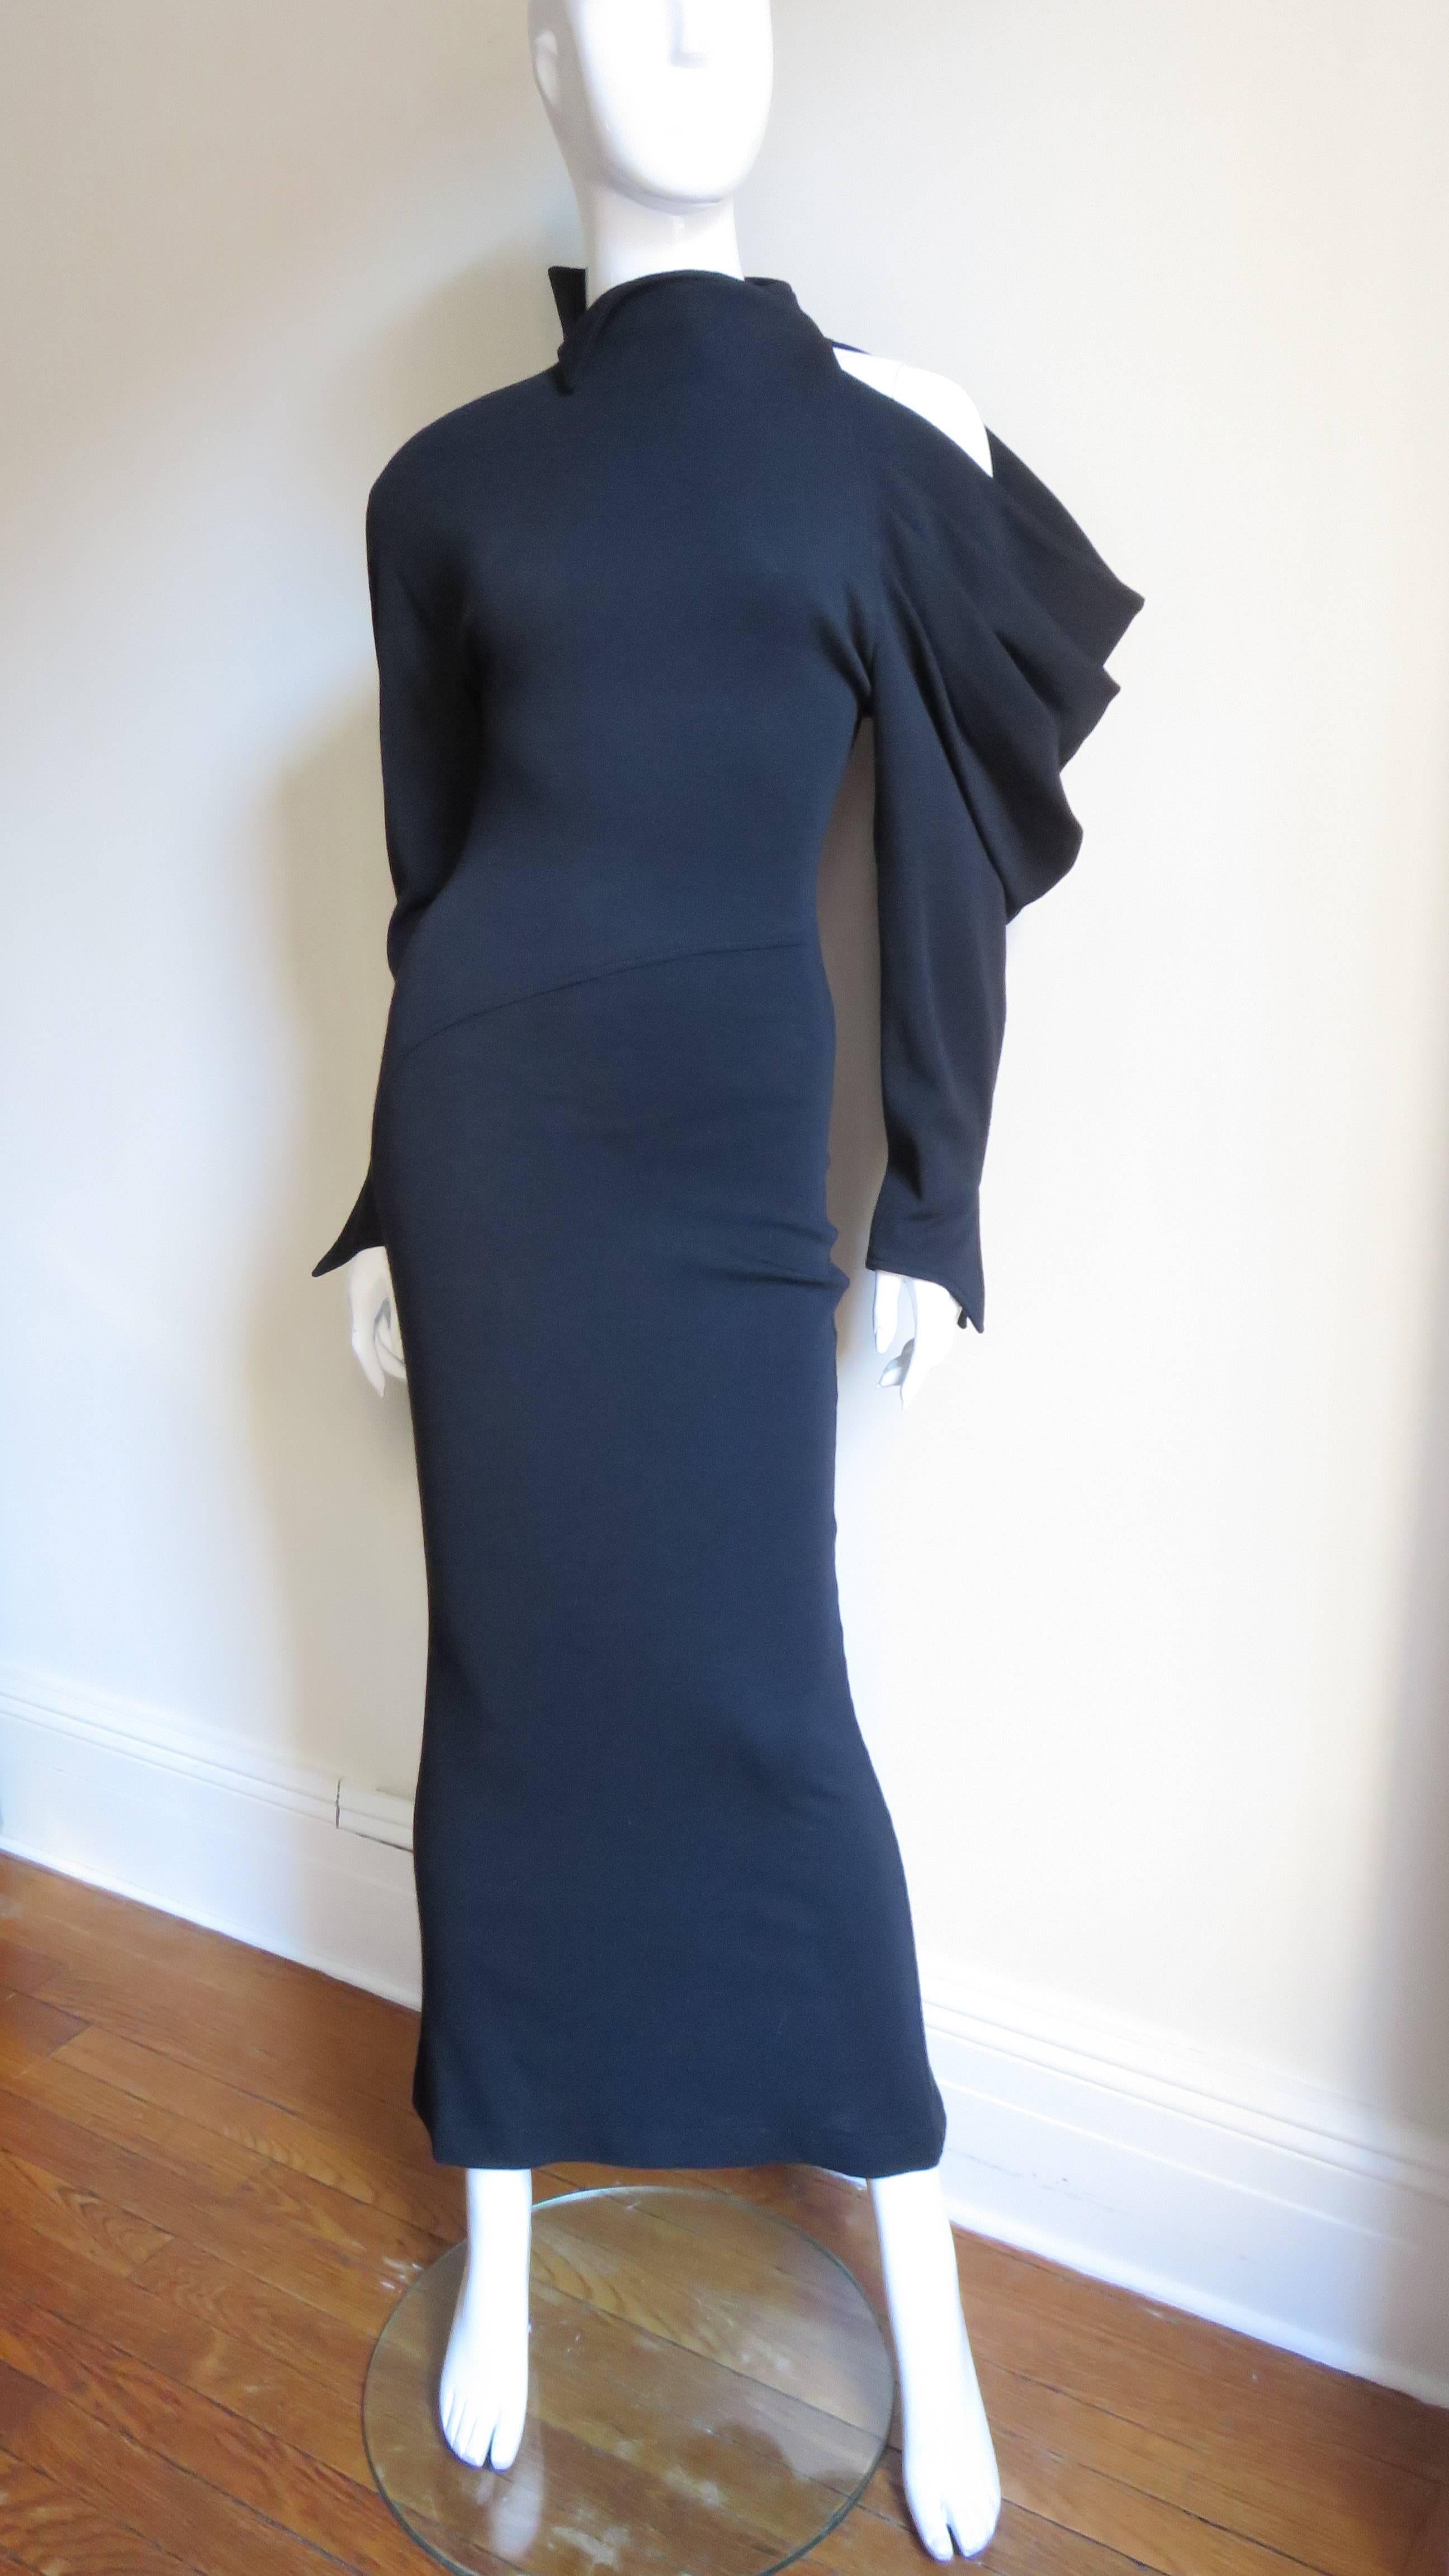 A dramatic long black wool jersey dress from Claude Montana.  It is fitted, enhanced with diagonal seaming flaring slightly at the hem. It has pointed split cuffs and a stand up collar. The drama comes from the sleeves - one ordinary long fitted